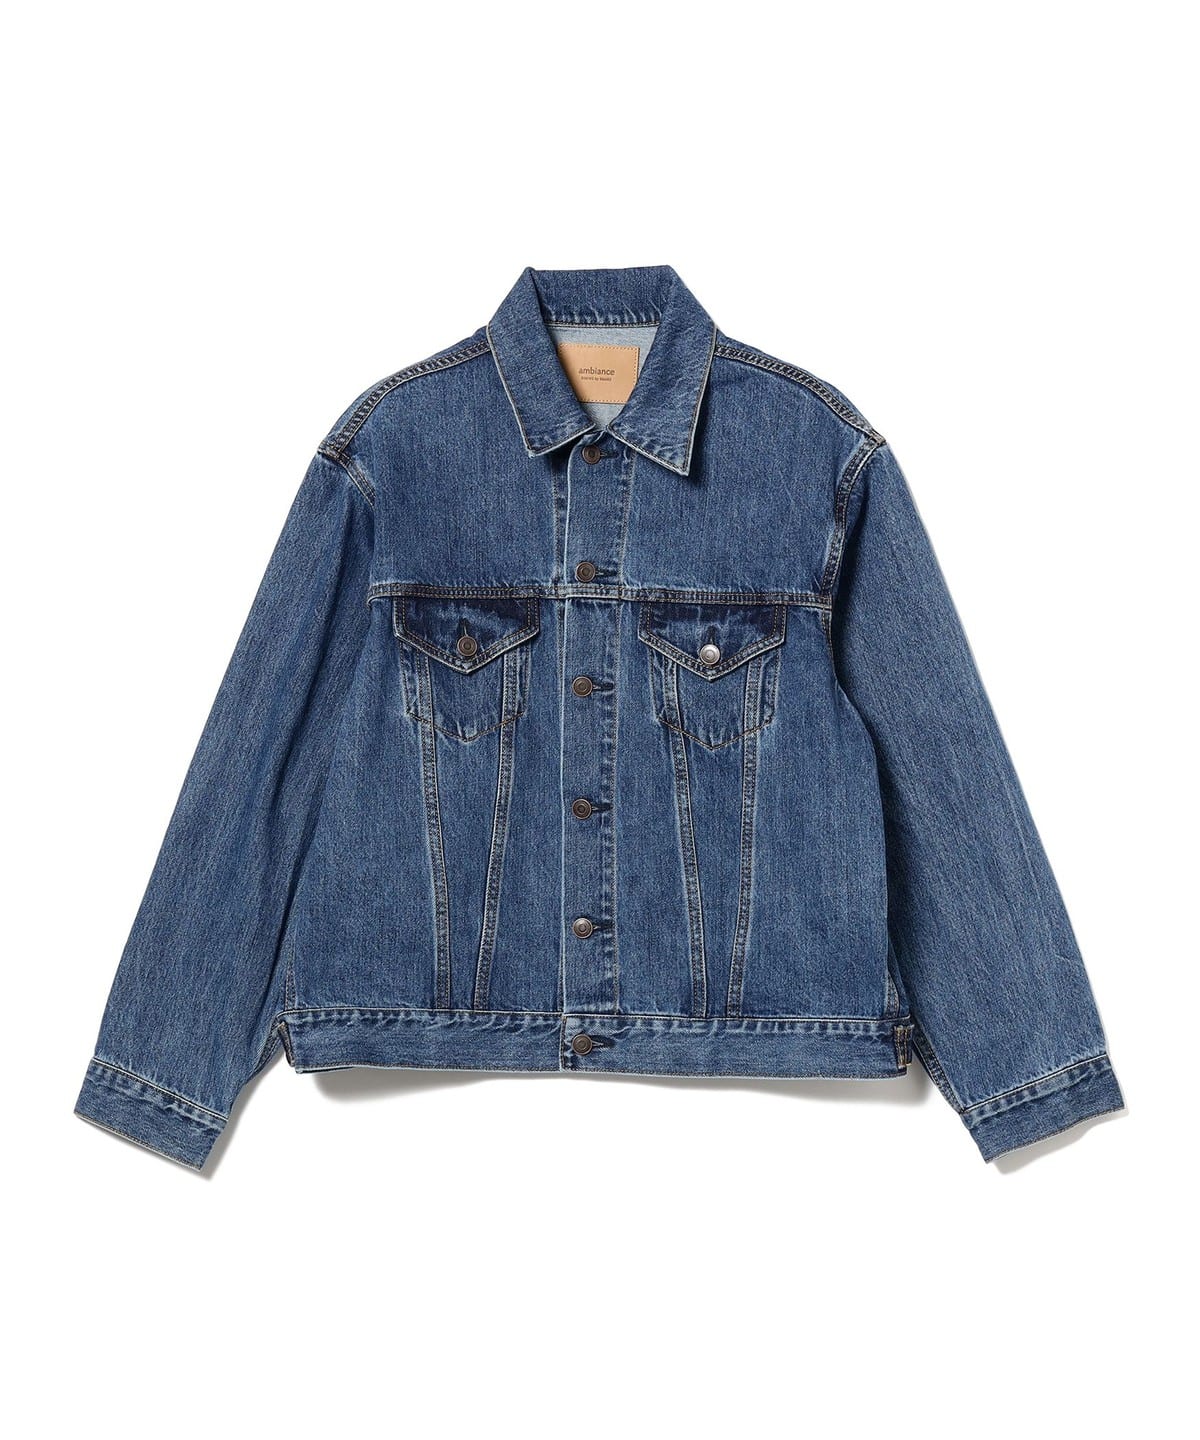 B:MING by BEAMS (B:MING by BEAMS) [Outlet] ambiance / Denim jacket 